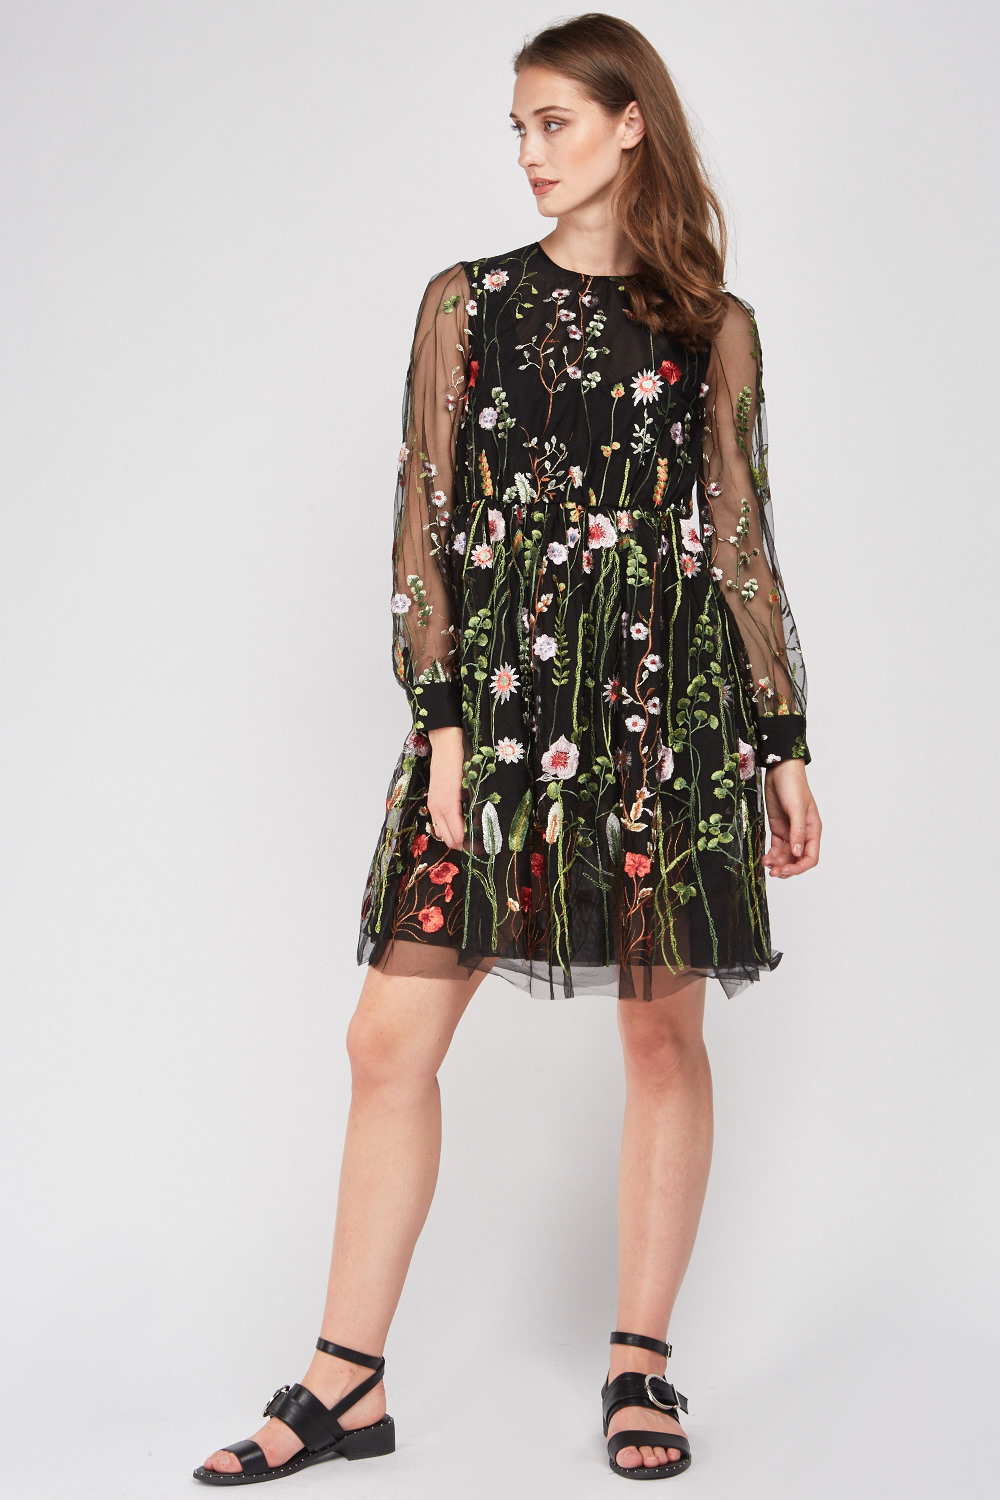 black mesh dress with flowers